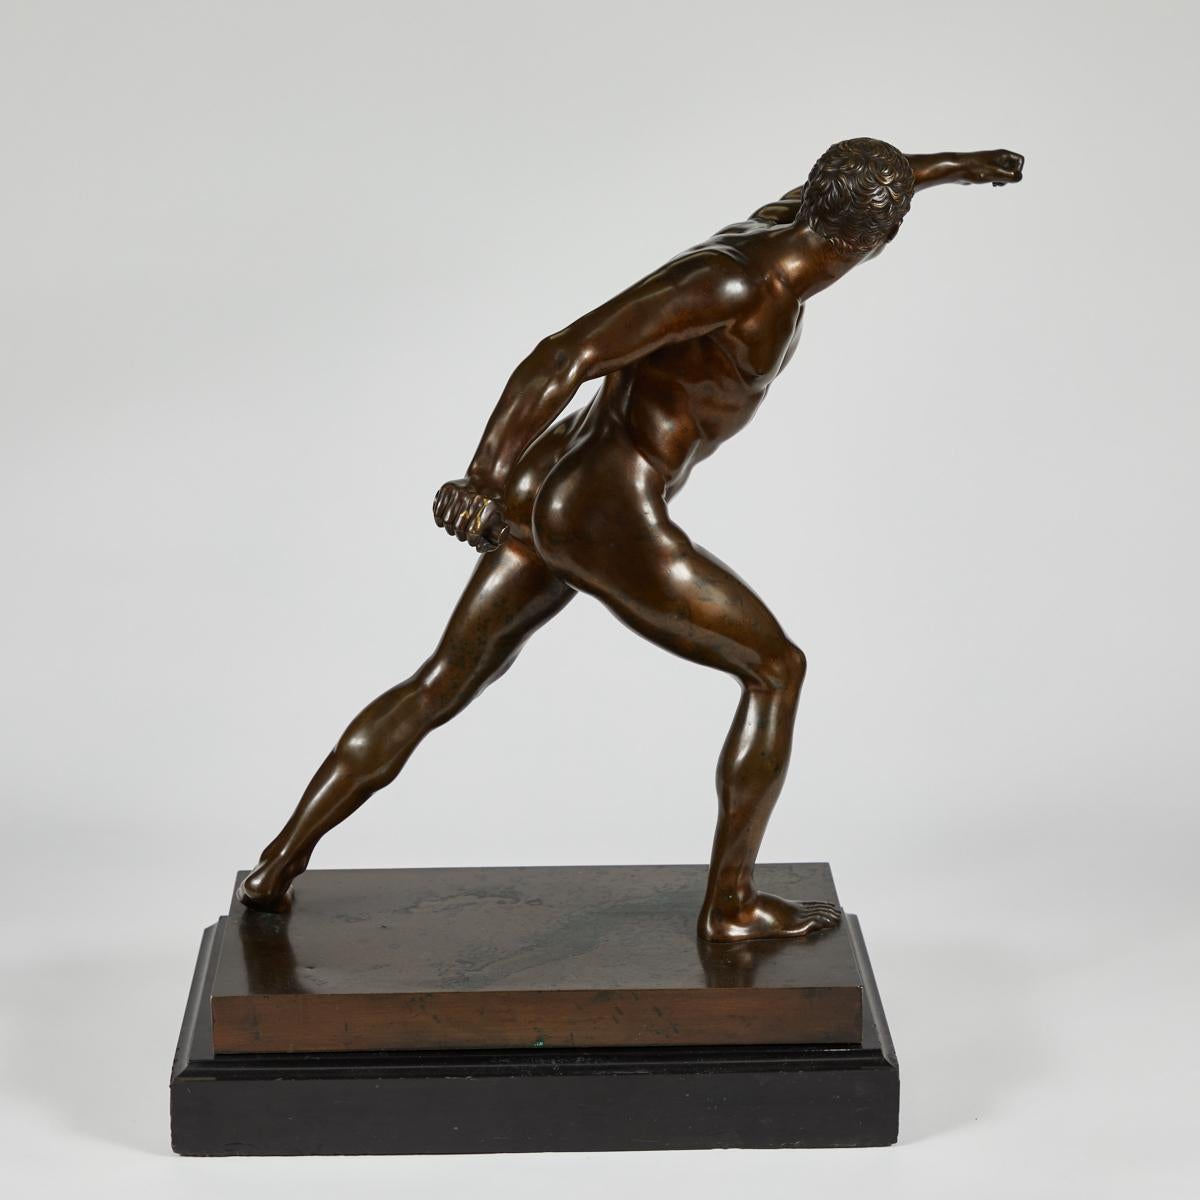 Dynamic French 19th-century bronze sculpture of a Greek warrior in action. An exquisitely naturalistic rendering of an athletic physique, the figure is dramatically caught in action.  The sculpture is mounted on a black marble fitted base. 

France,